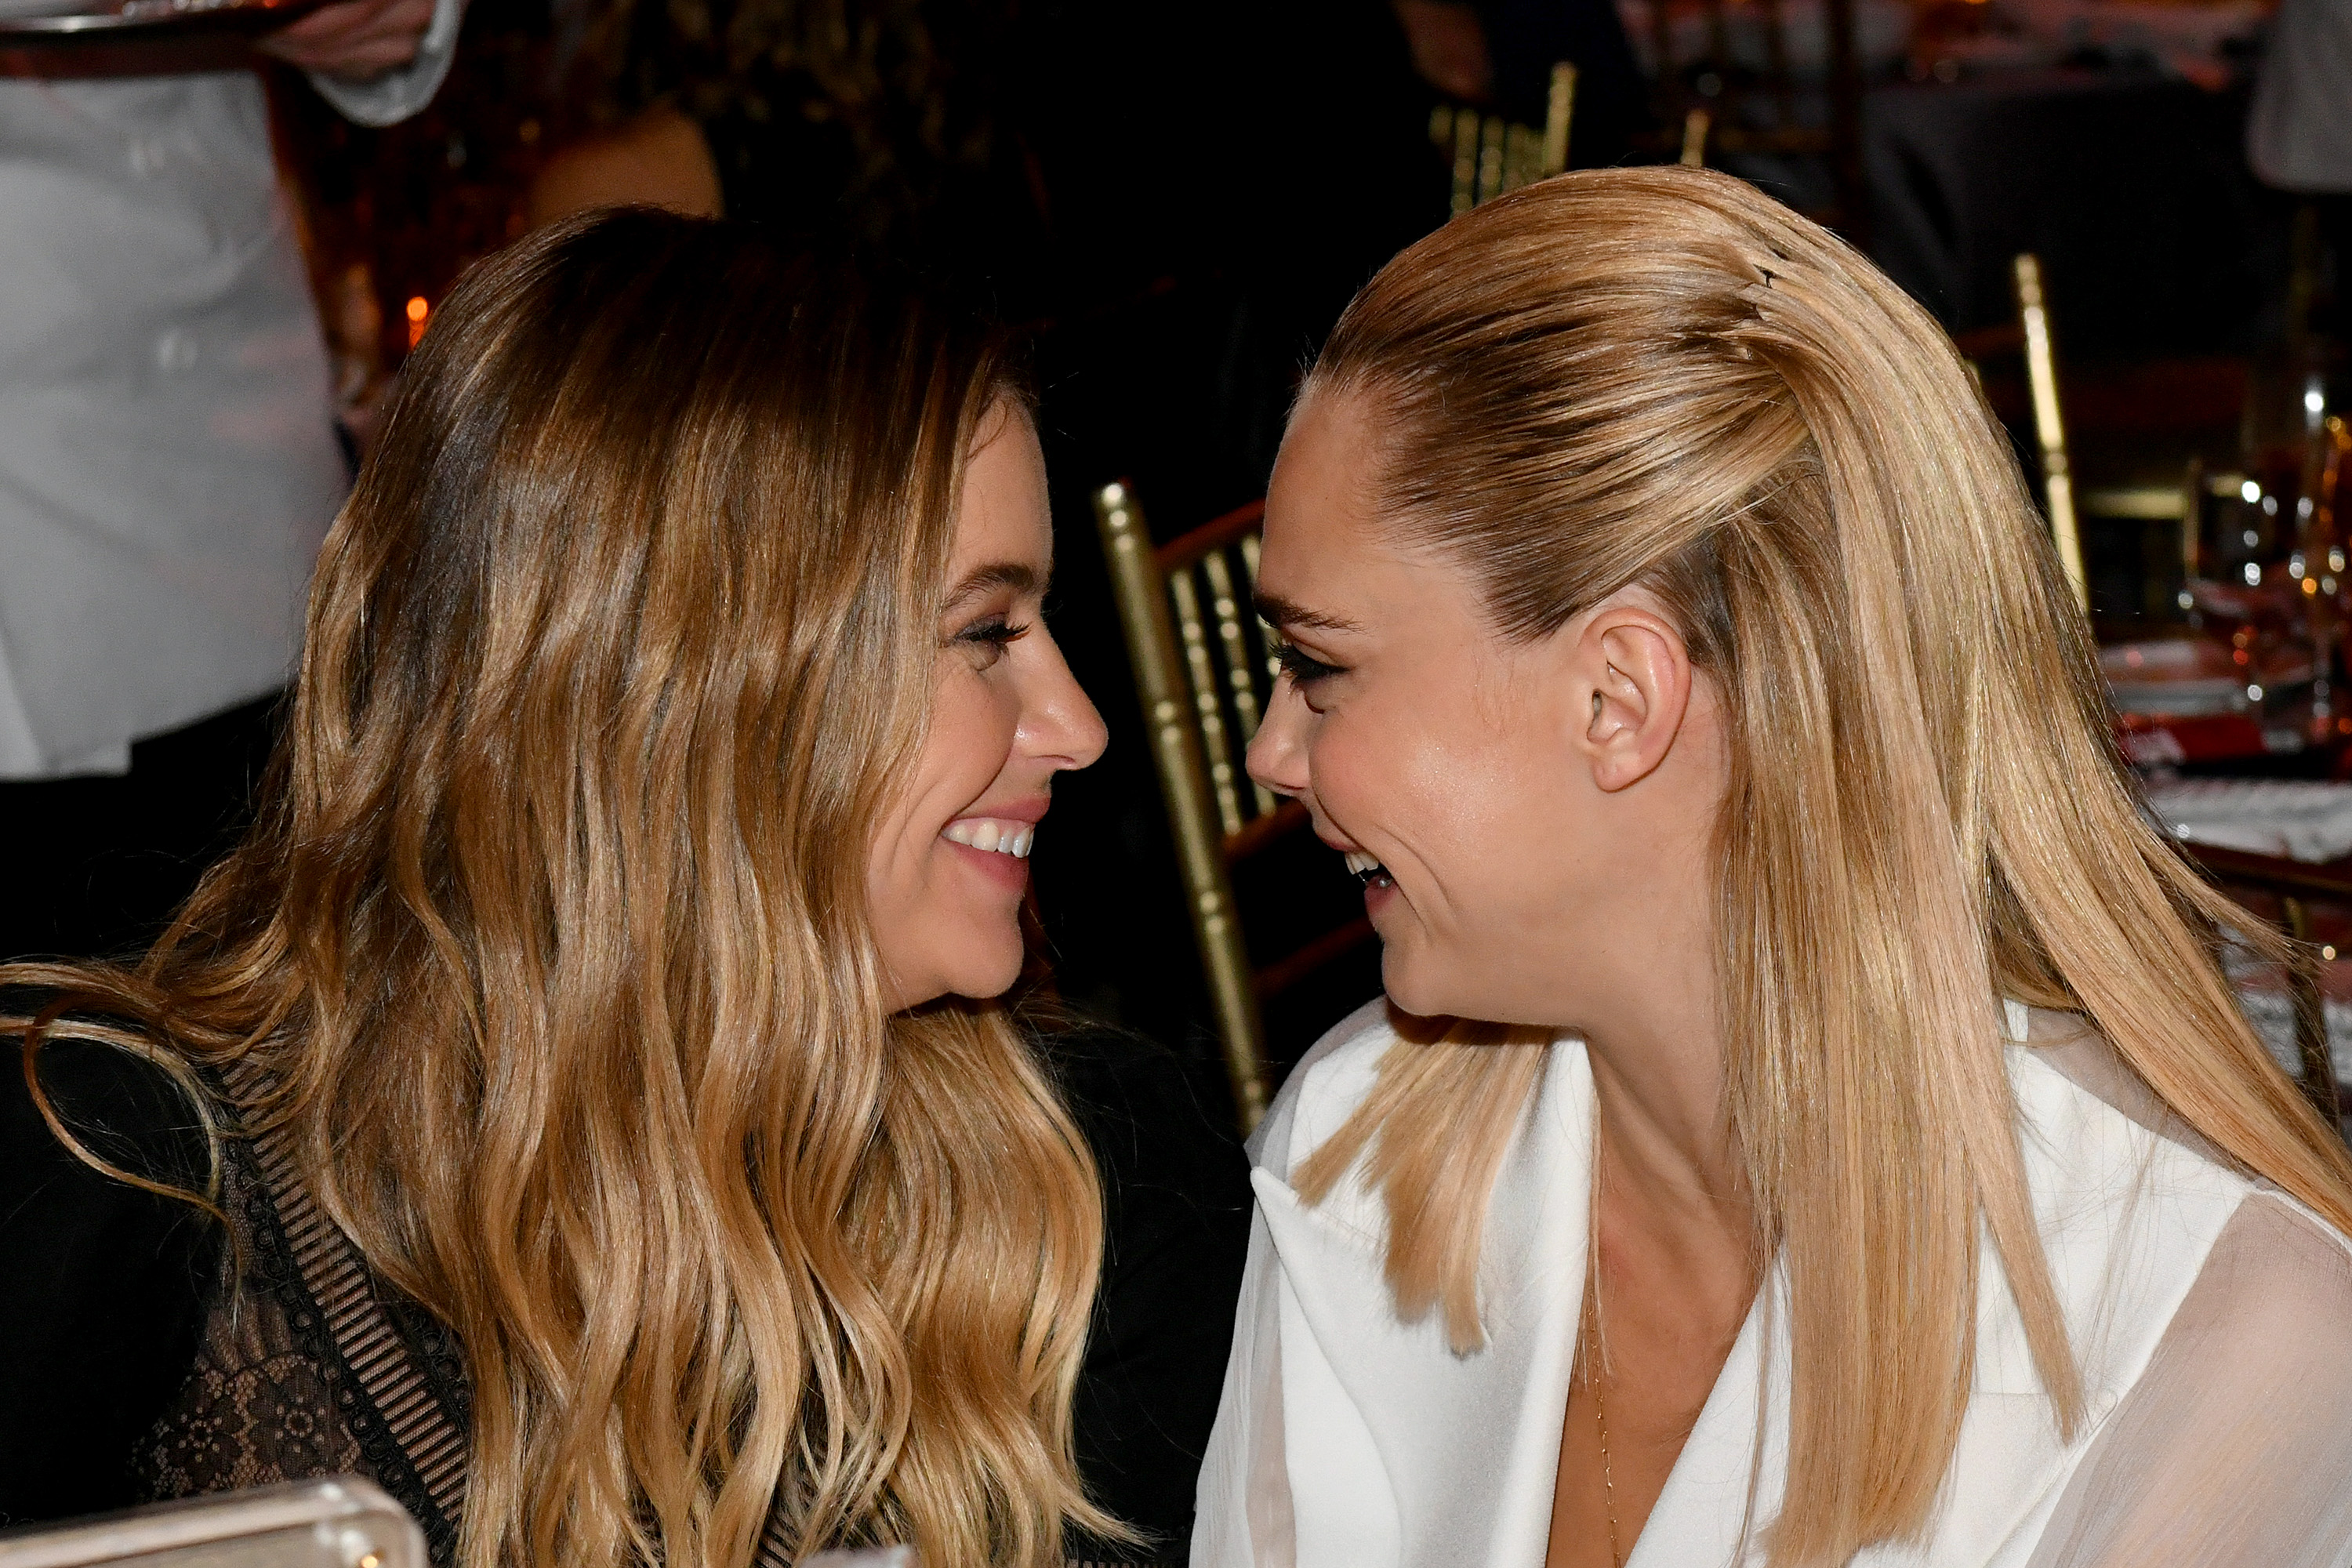 Ashley Benson and Cara Delevingne attend TrevorLIVE NY 2019 at Cipriani Wall Street on June 17, 2019 in New York City. (Photo by Craig Barritt/Getty Images for The Trevor Project)